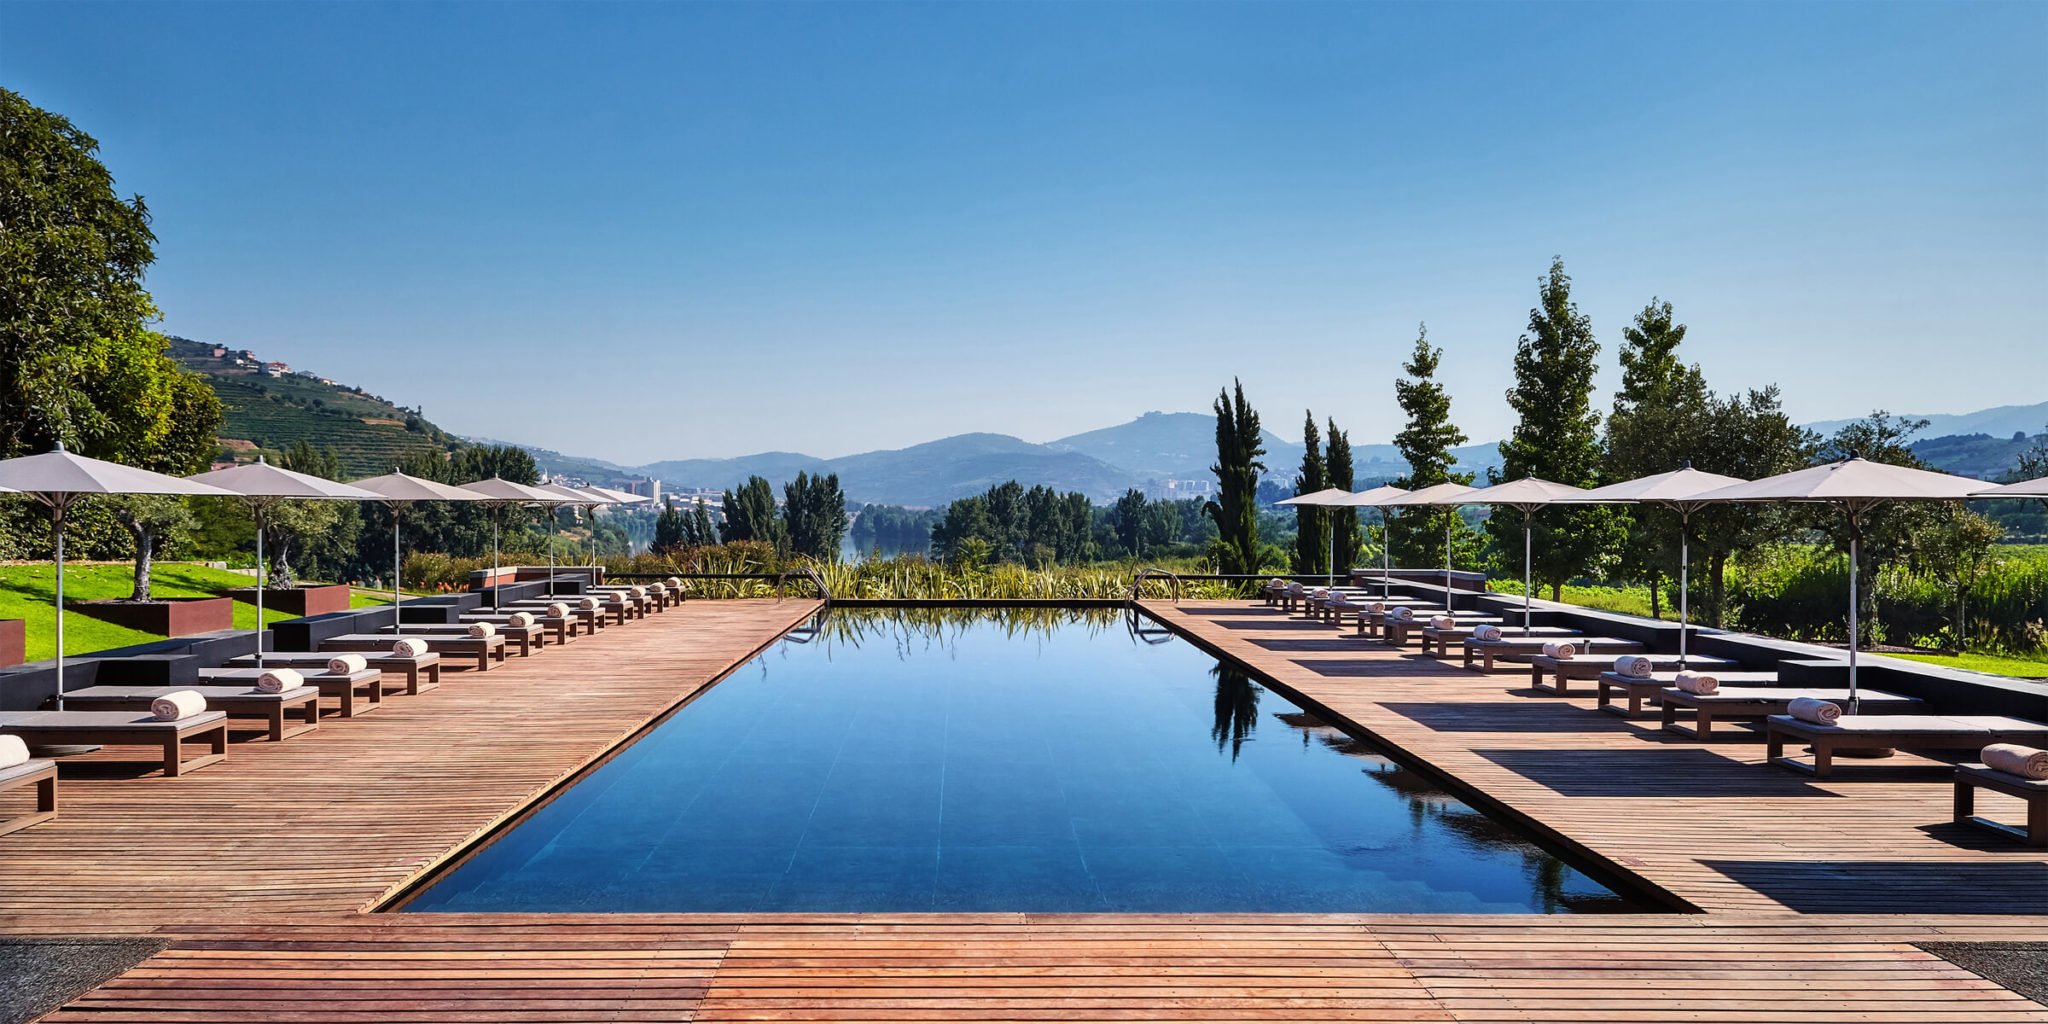 Discovering Luxury in Portugal